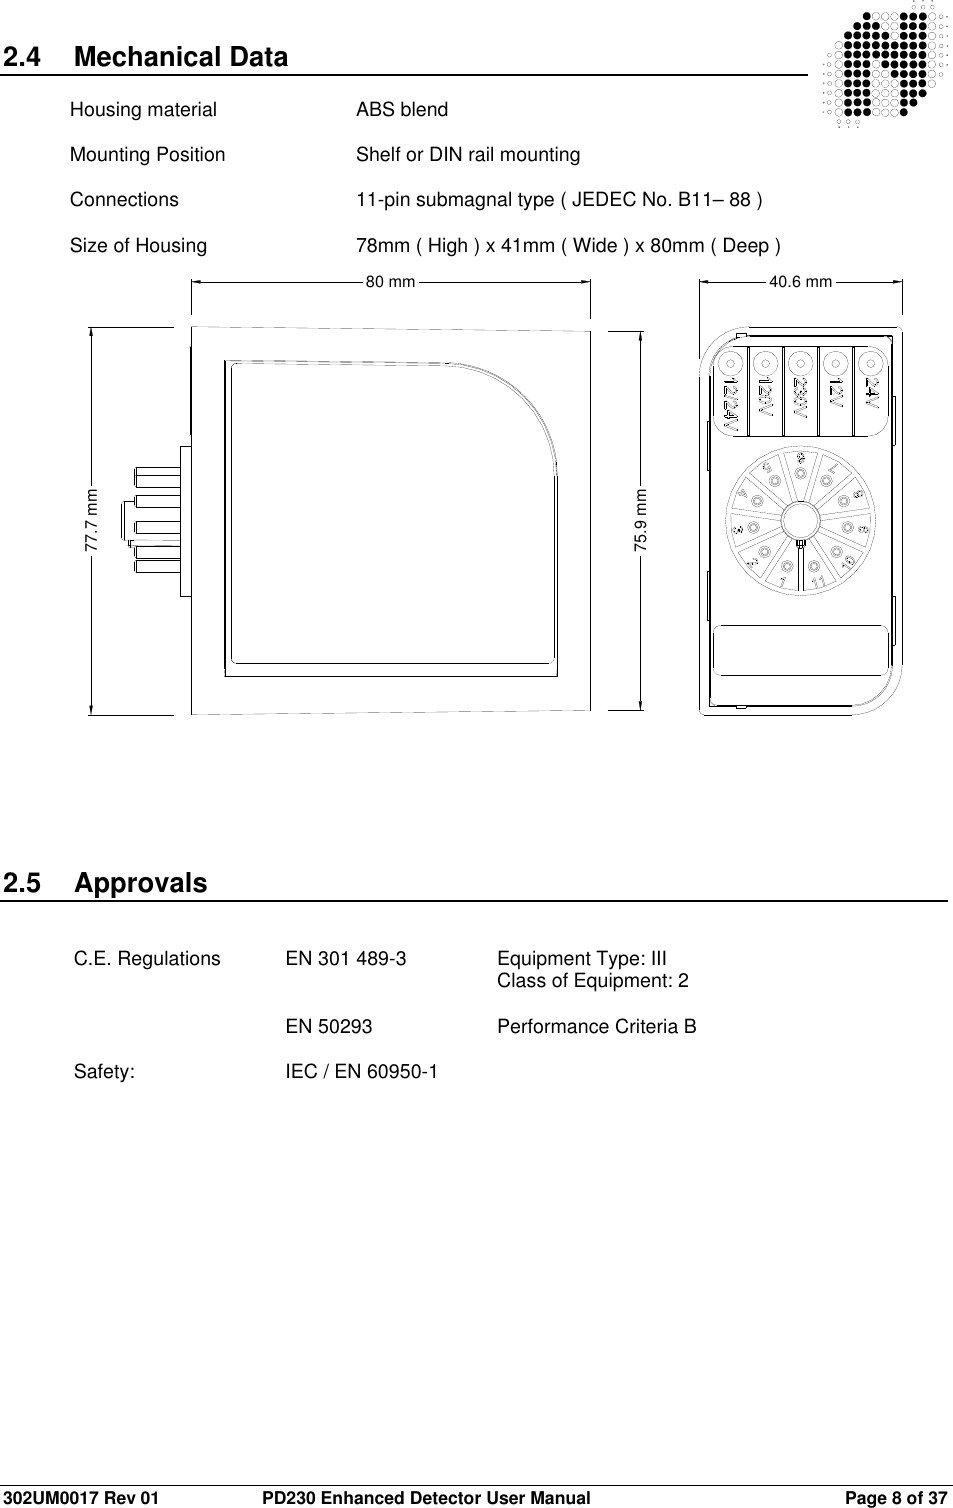  302UM0017 Rev 01  PD230 Enhanced Detector User Manual   Page 8 of 37 2.4  Mechanical Data  Housing material   ABS blend  Mounting Position    Shelf or DIN rail mounting  Connections      11-pin submagnal type ( JEDEC No. B11– 88 )  Size of Housing     78mm ( High ) x 41mm ( Wide ) x 80mm ( Deep )                              2.5  Approvals   C.E. Regulations  EN 301 489-3    Equipment Type: III               Class of Equipment: 2        EN 50293    Performance Criteria B   Safety:      IEC / EN 60950-1    80 mm75.9 mm77.7 mm40.6 mm